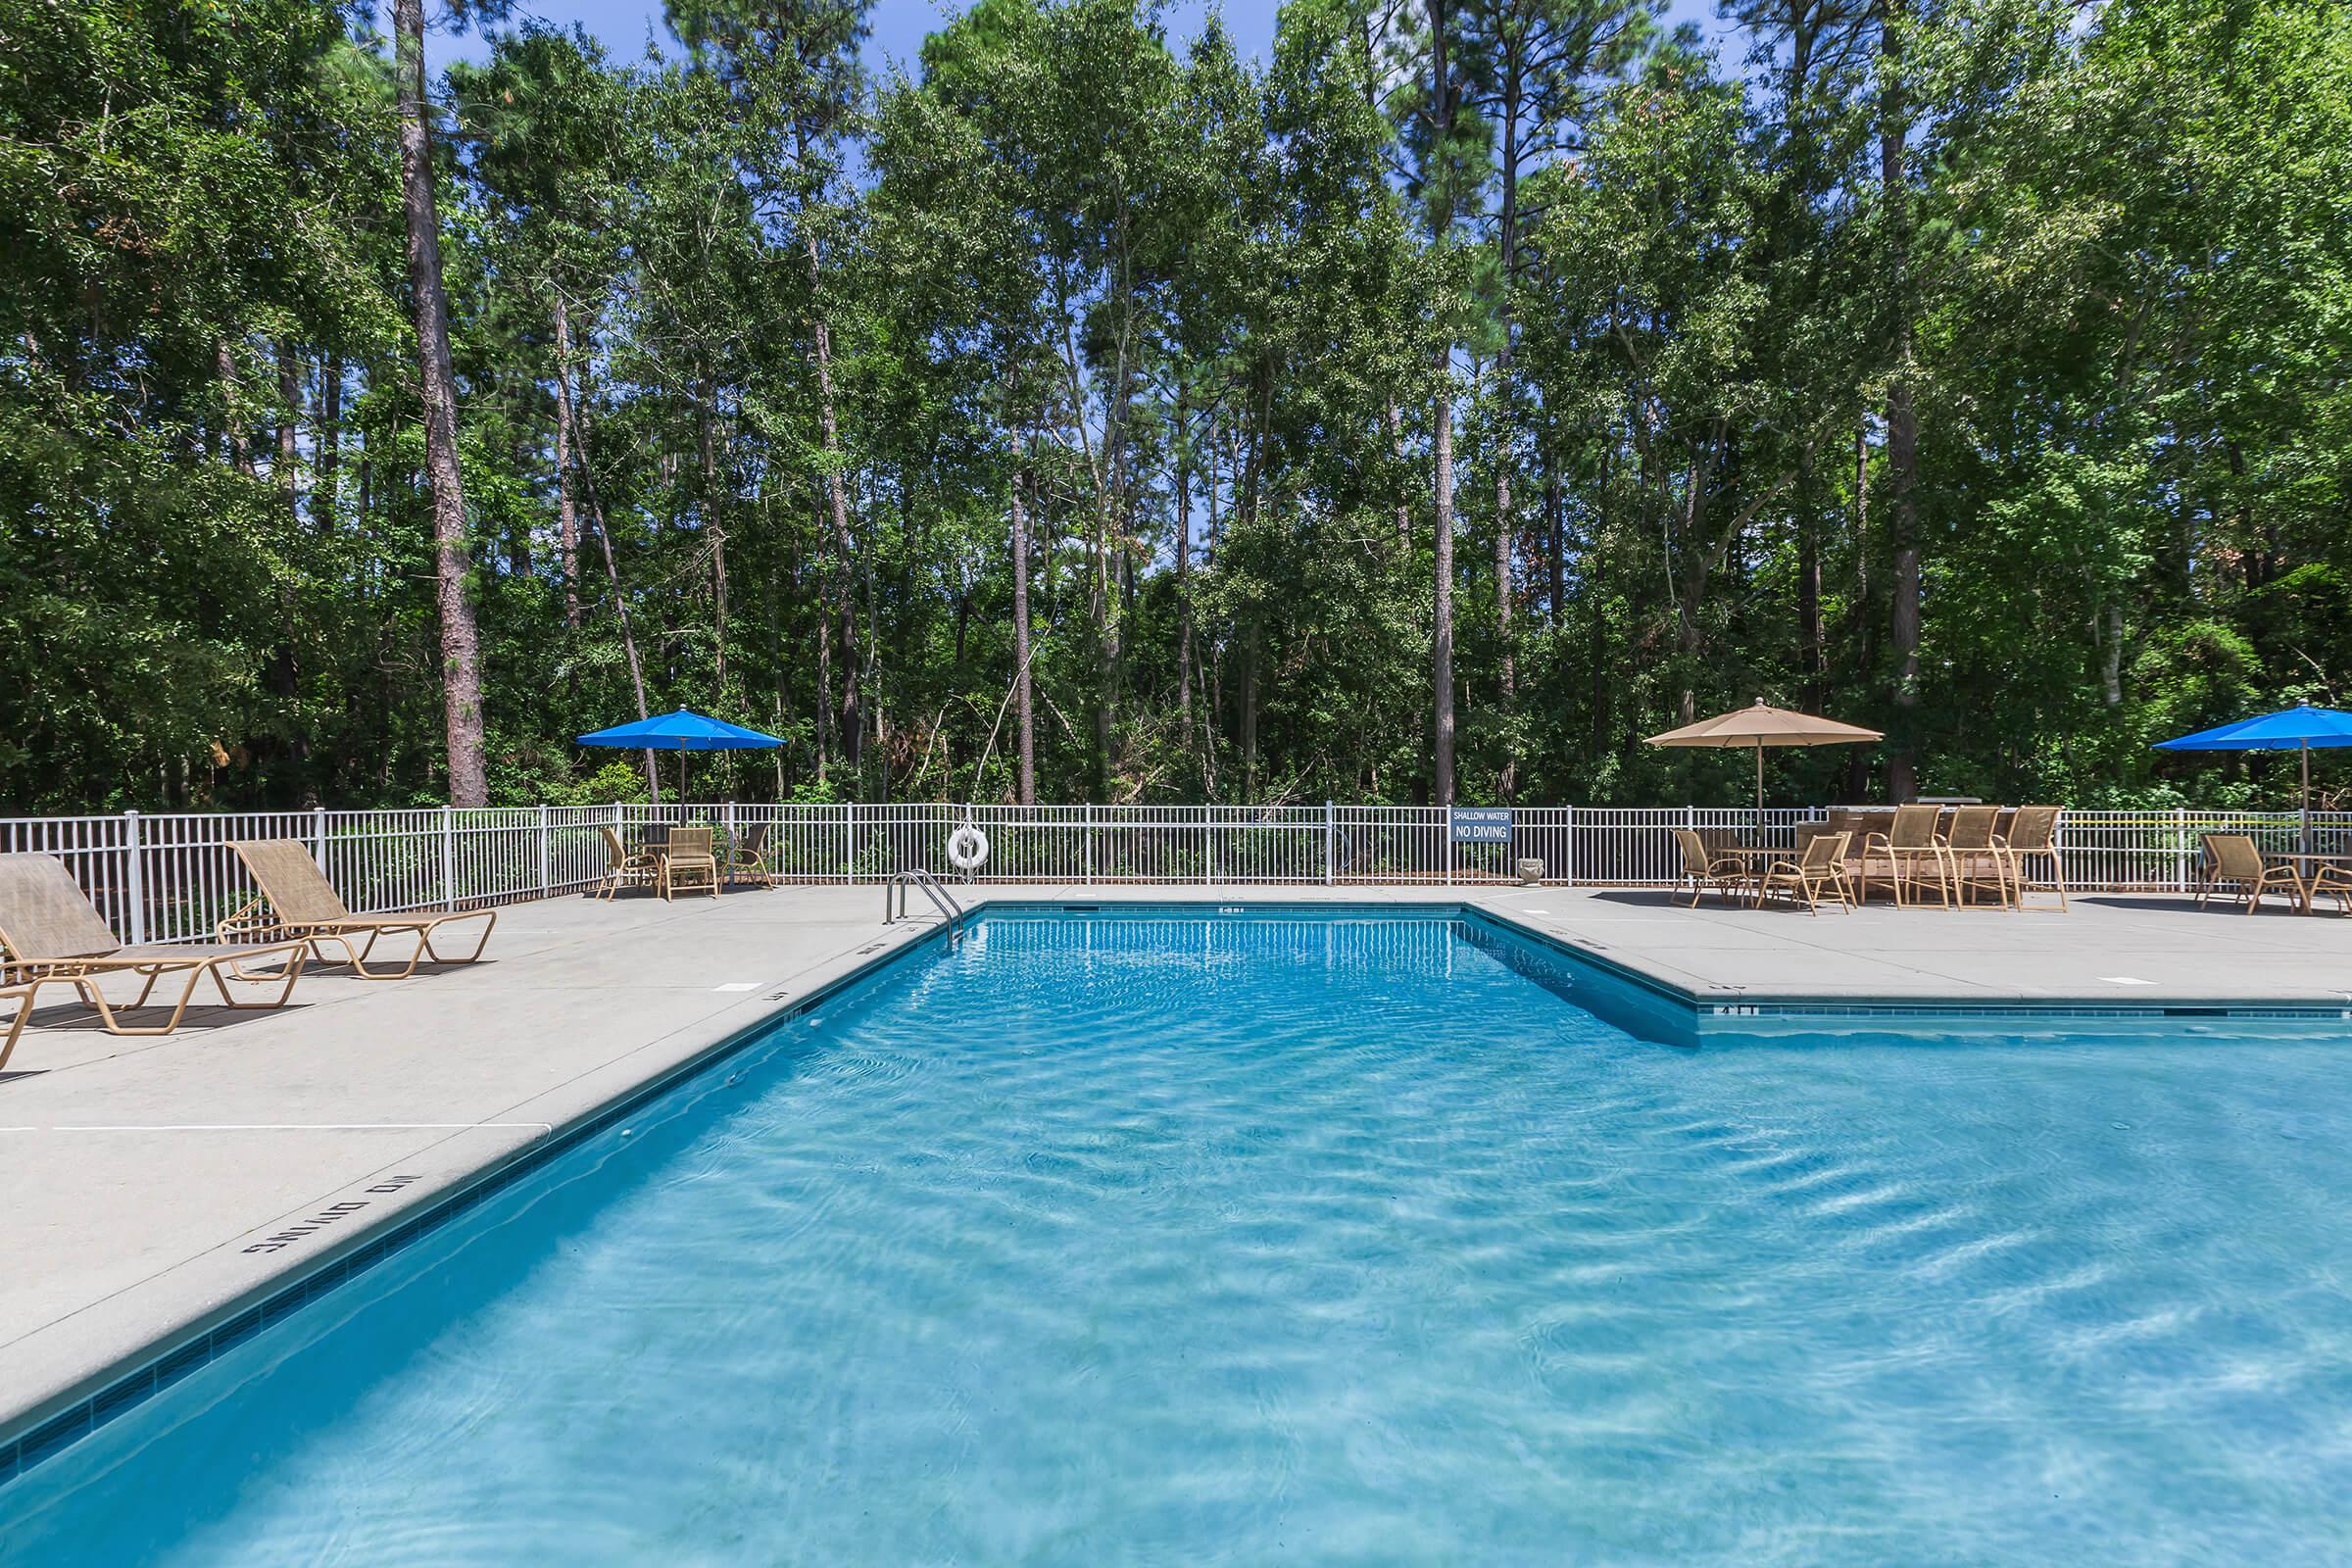 Have fun in the sun at the swimming pool at Tesla Park in Wilmington, NC.